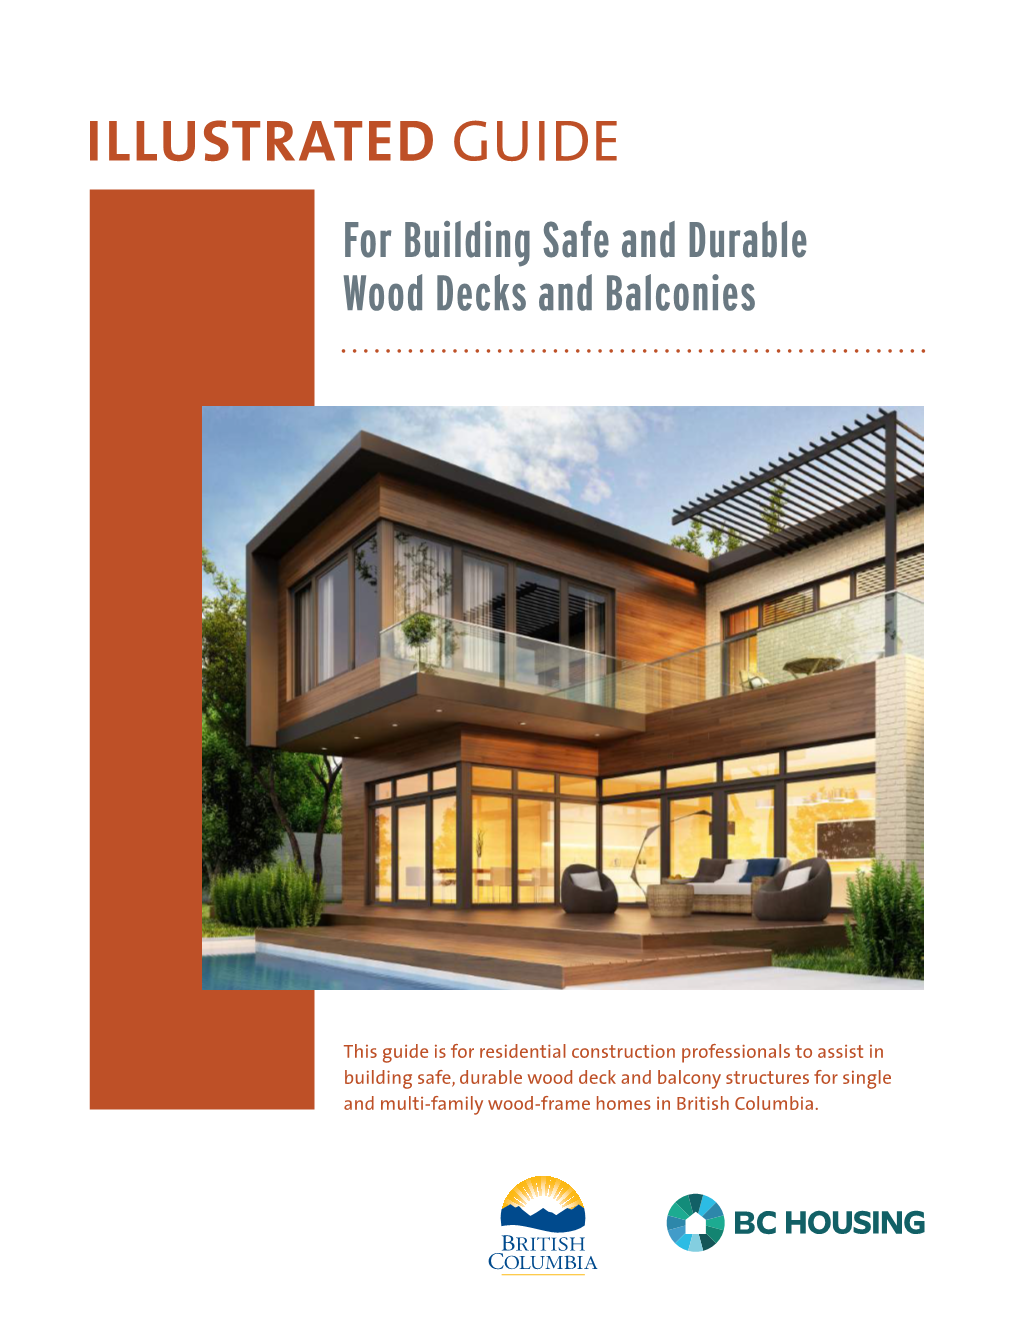 ILLUSTRATED GUIDE for Building Safe and Durable Wood Decks and Balconies